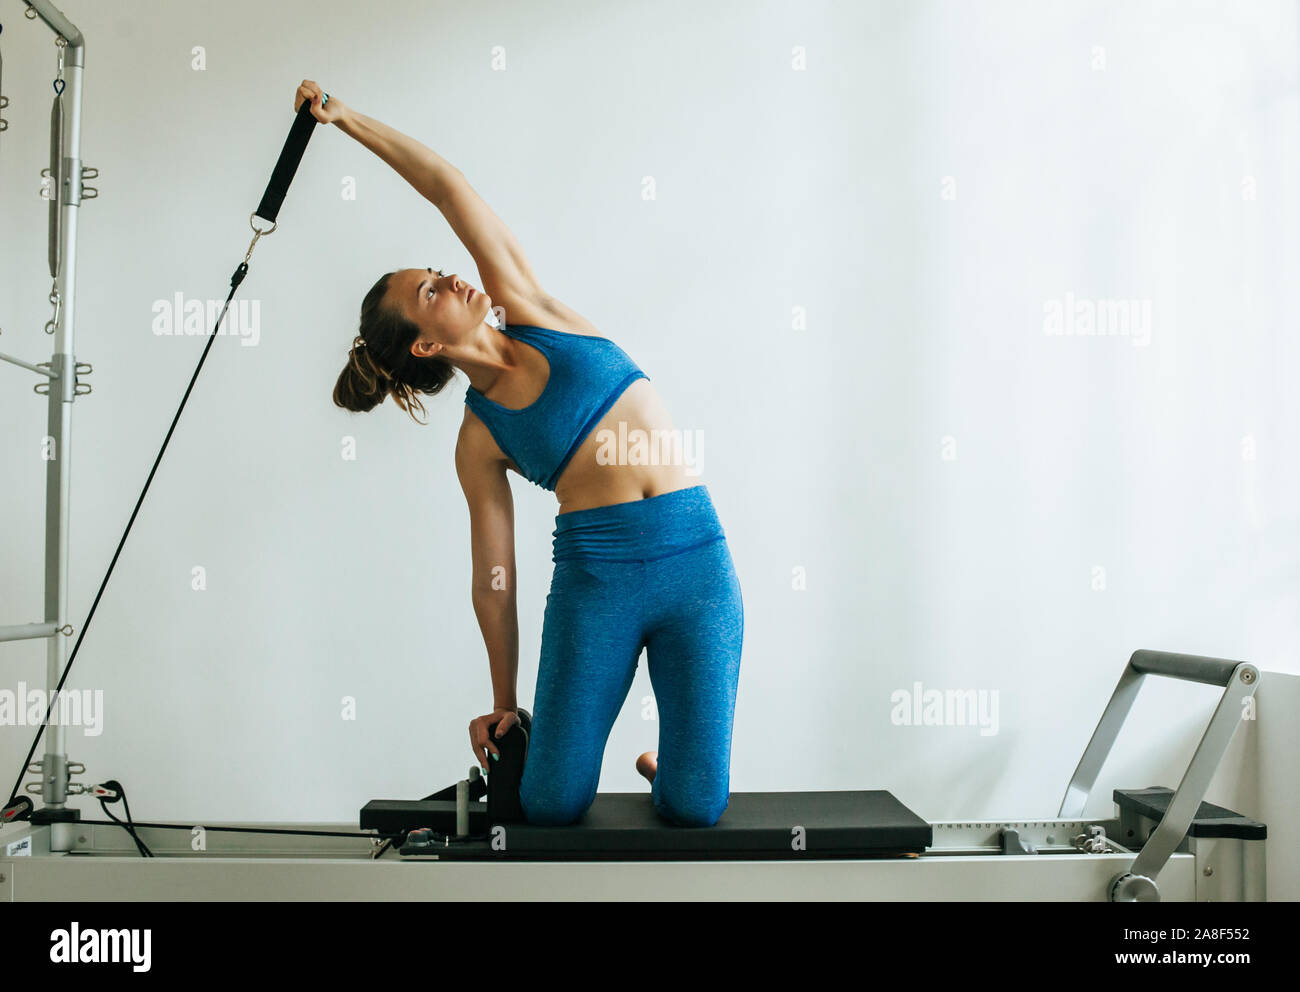 Woman performing Pilates exercise using a Cadillac or Trapeze table Stock Photo